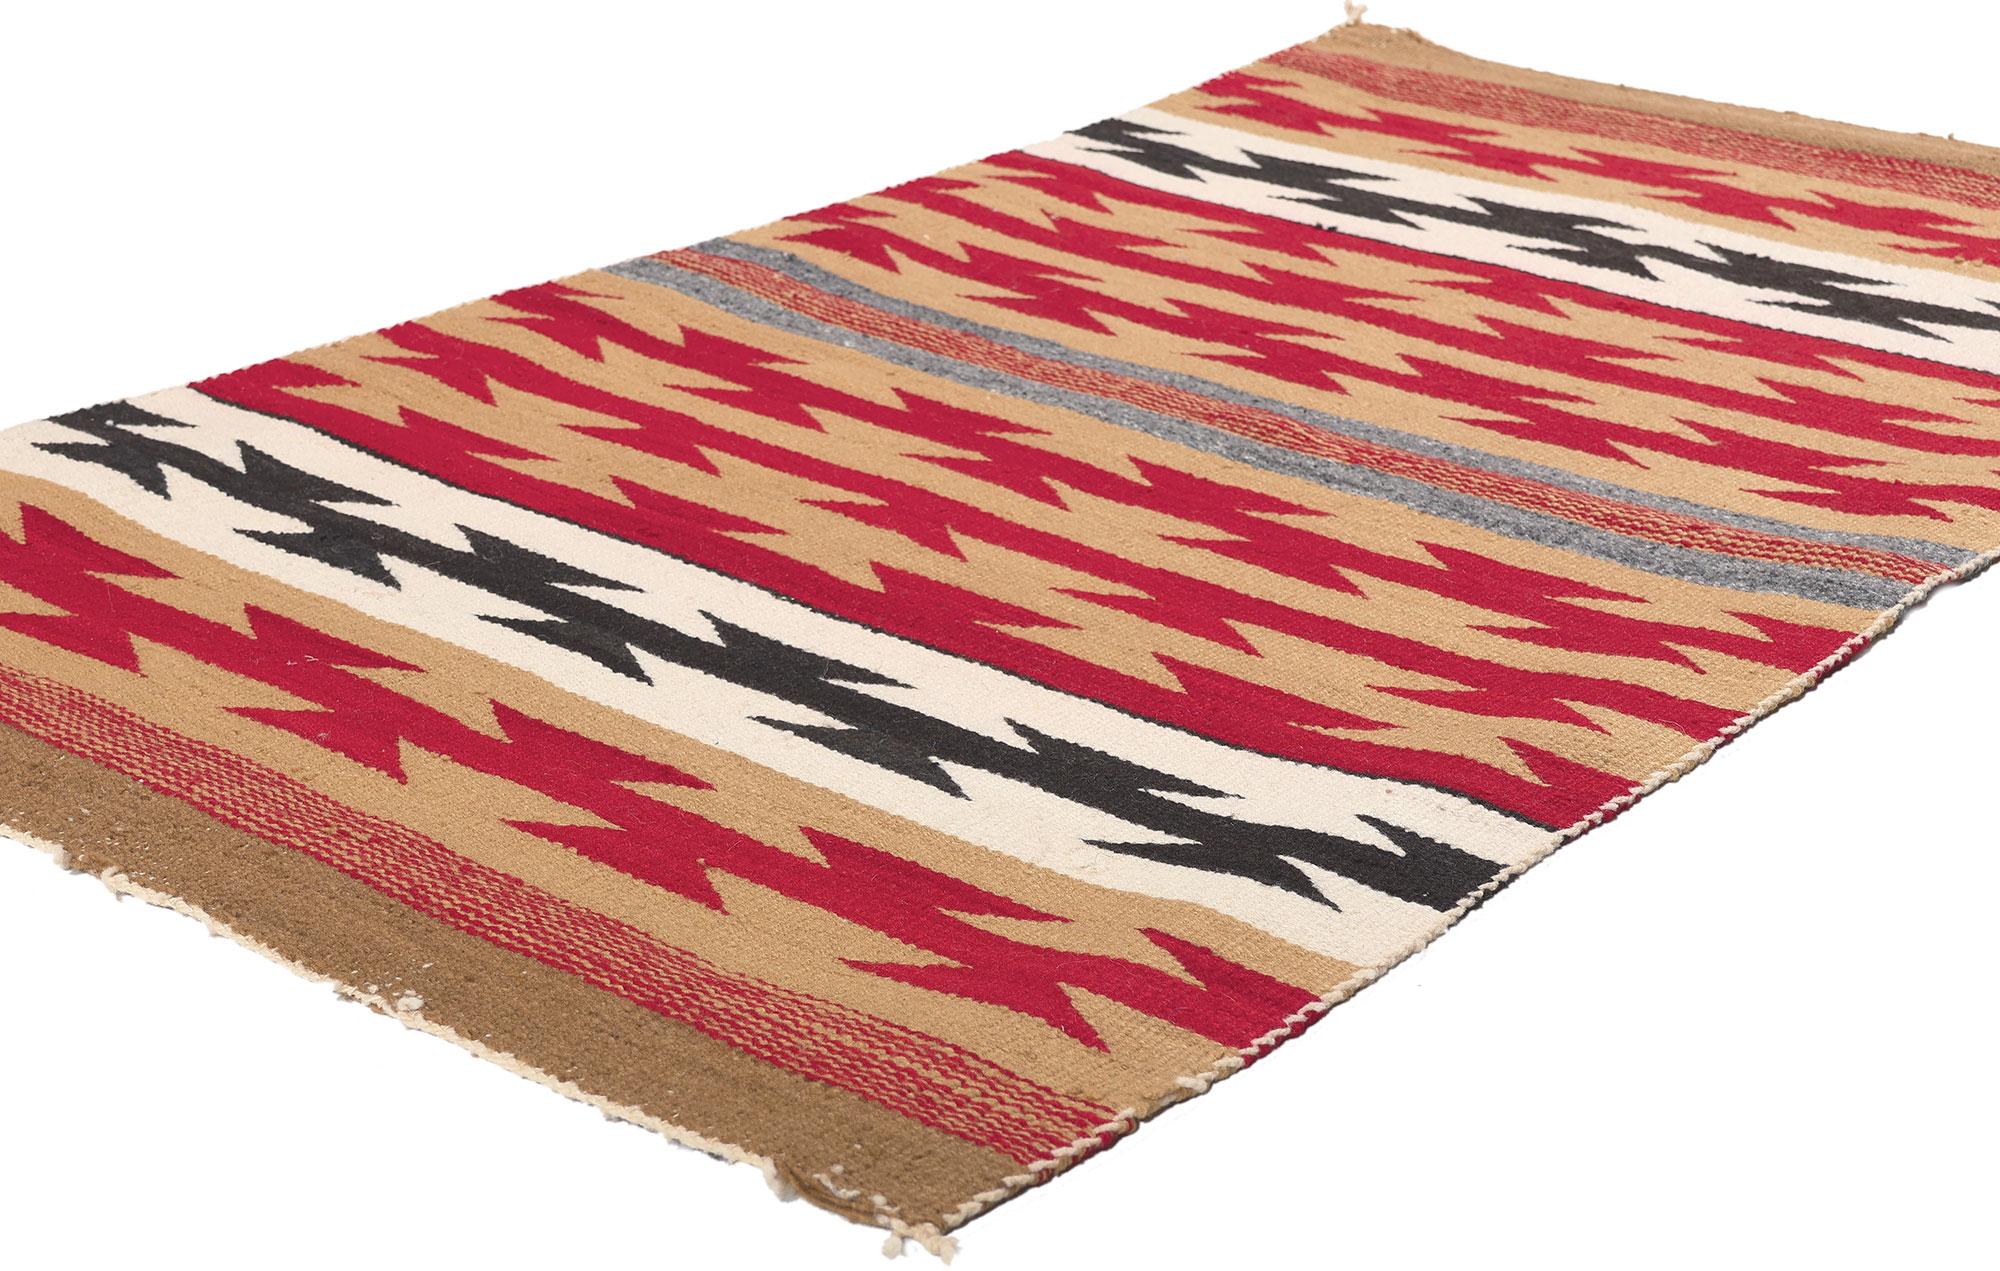 78558 Antique Chinle Navajo Rug, 02'09 x 04'06.
Emanating Native American style with incredible detail and texture, this handwoven Chinle Navajo rug is a captivating vision of woven beauty. The eye-catching geometric pattern and earthy colorway